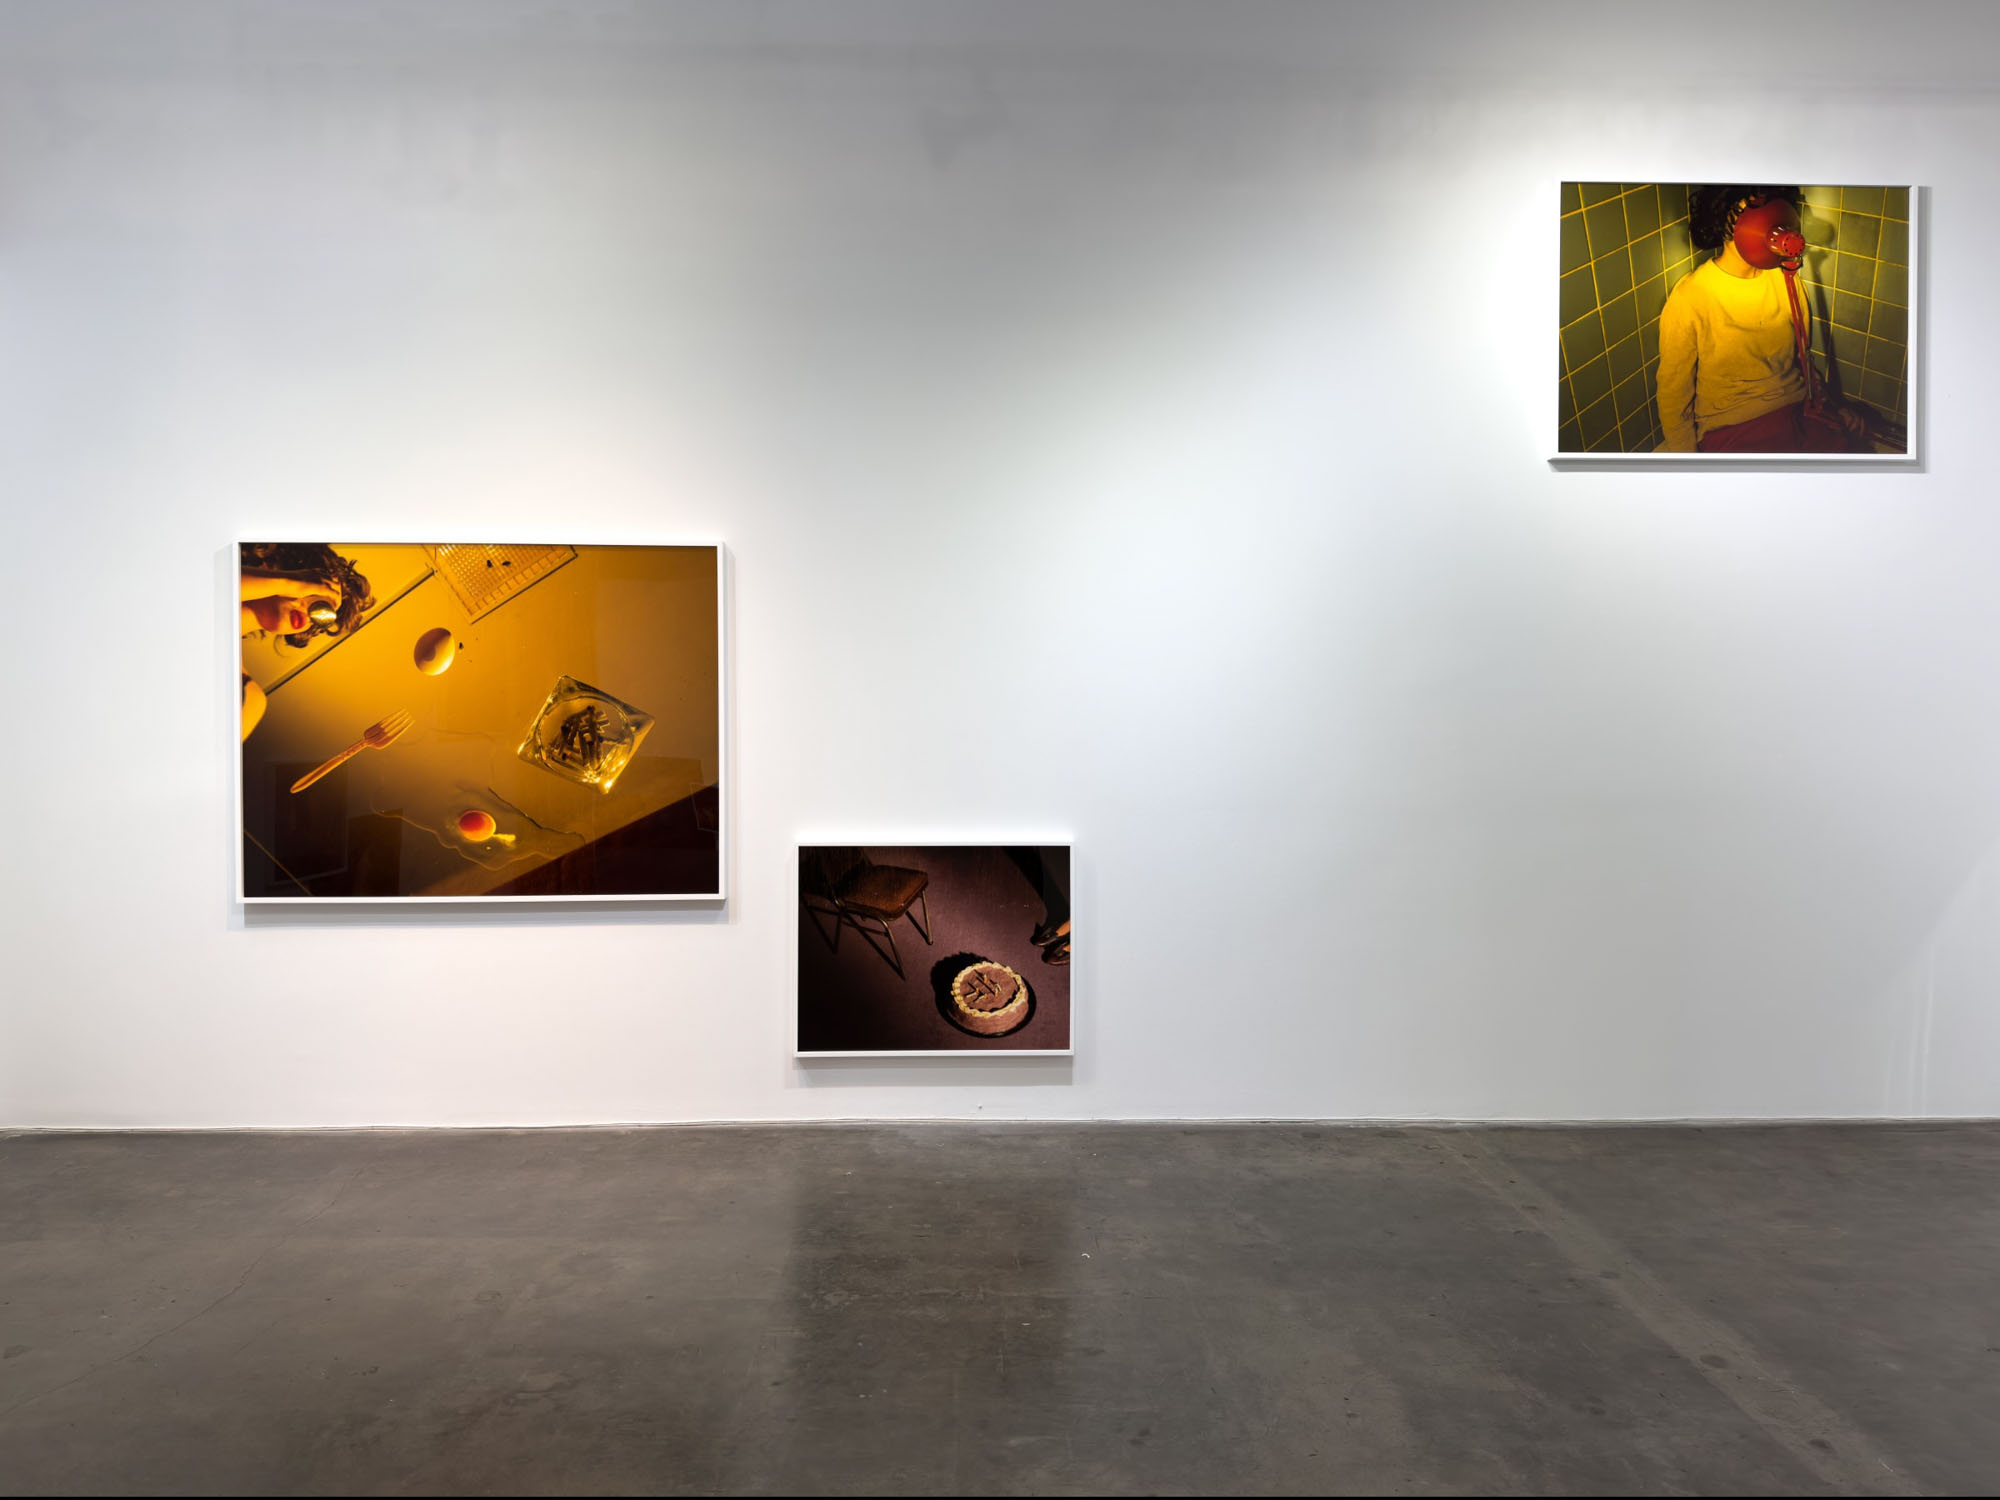 Installation view of "Break in Case of Emergency" at Rose Gallery